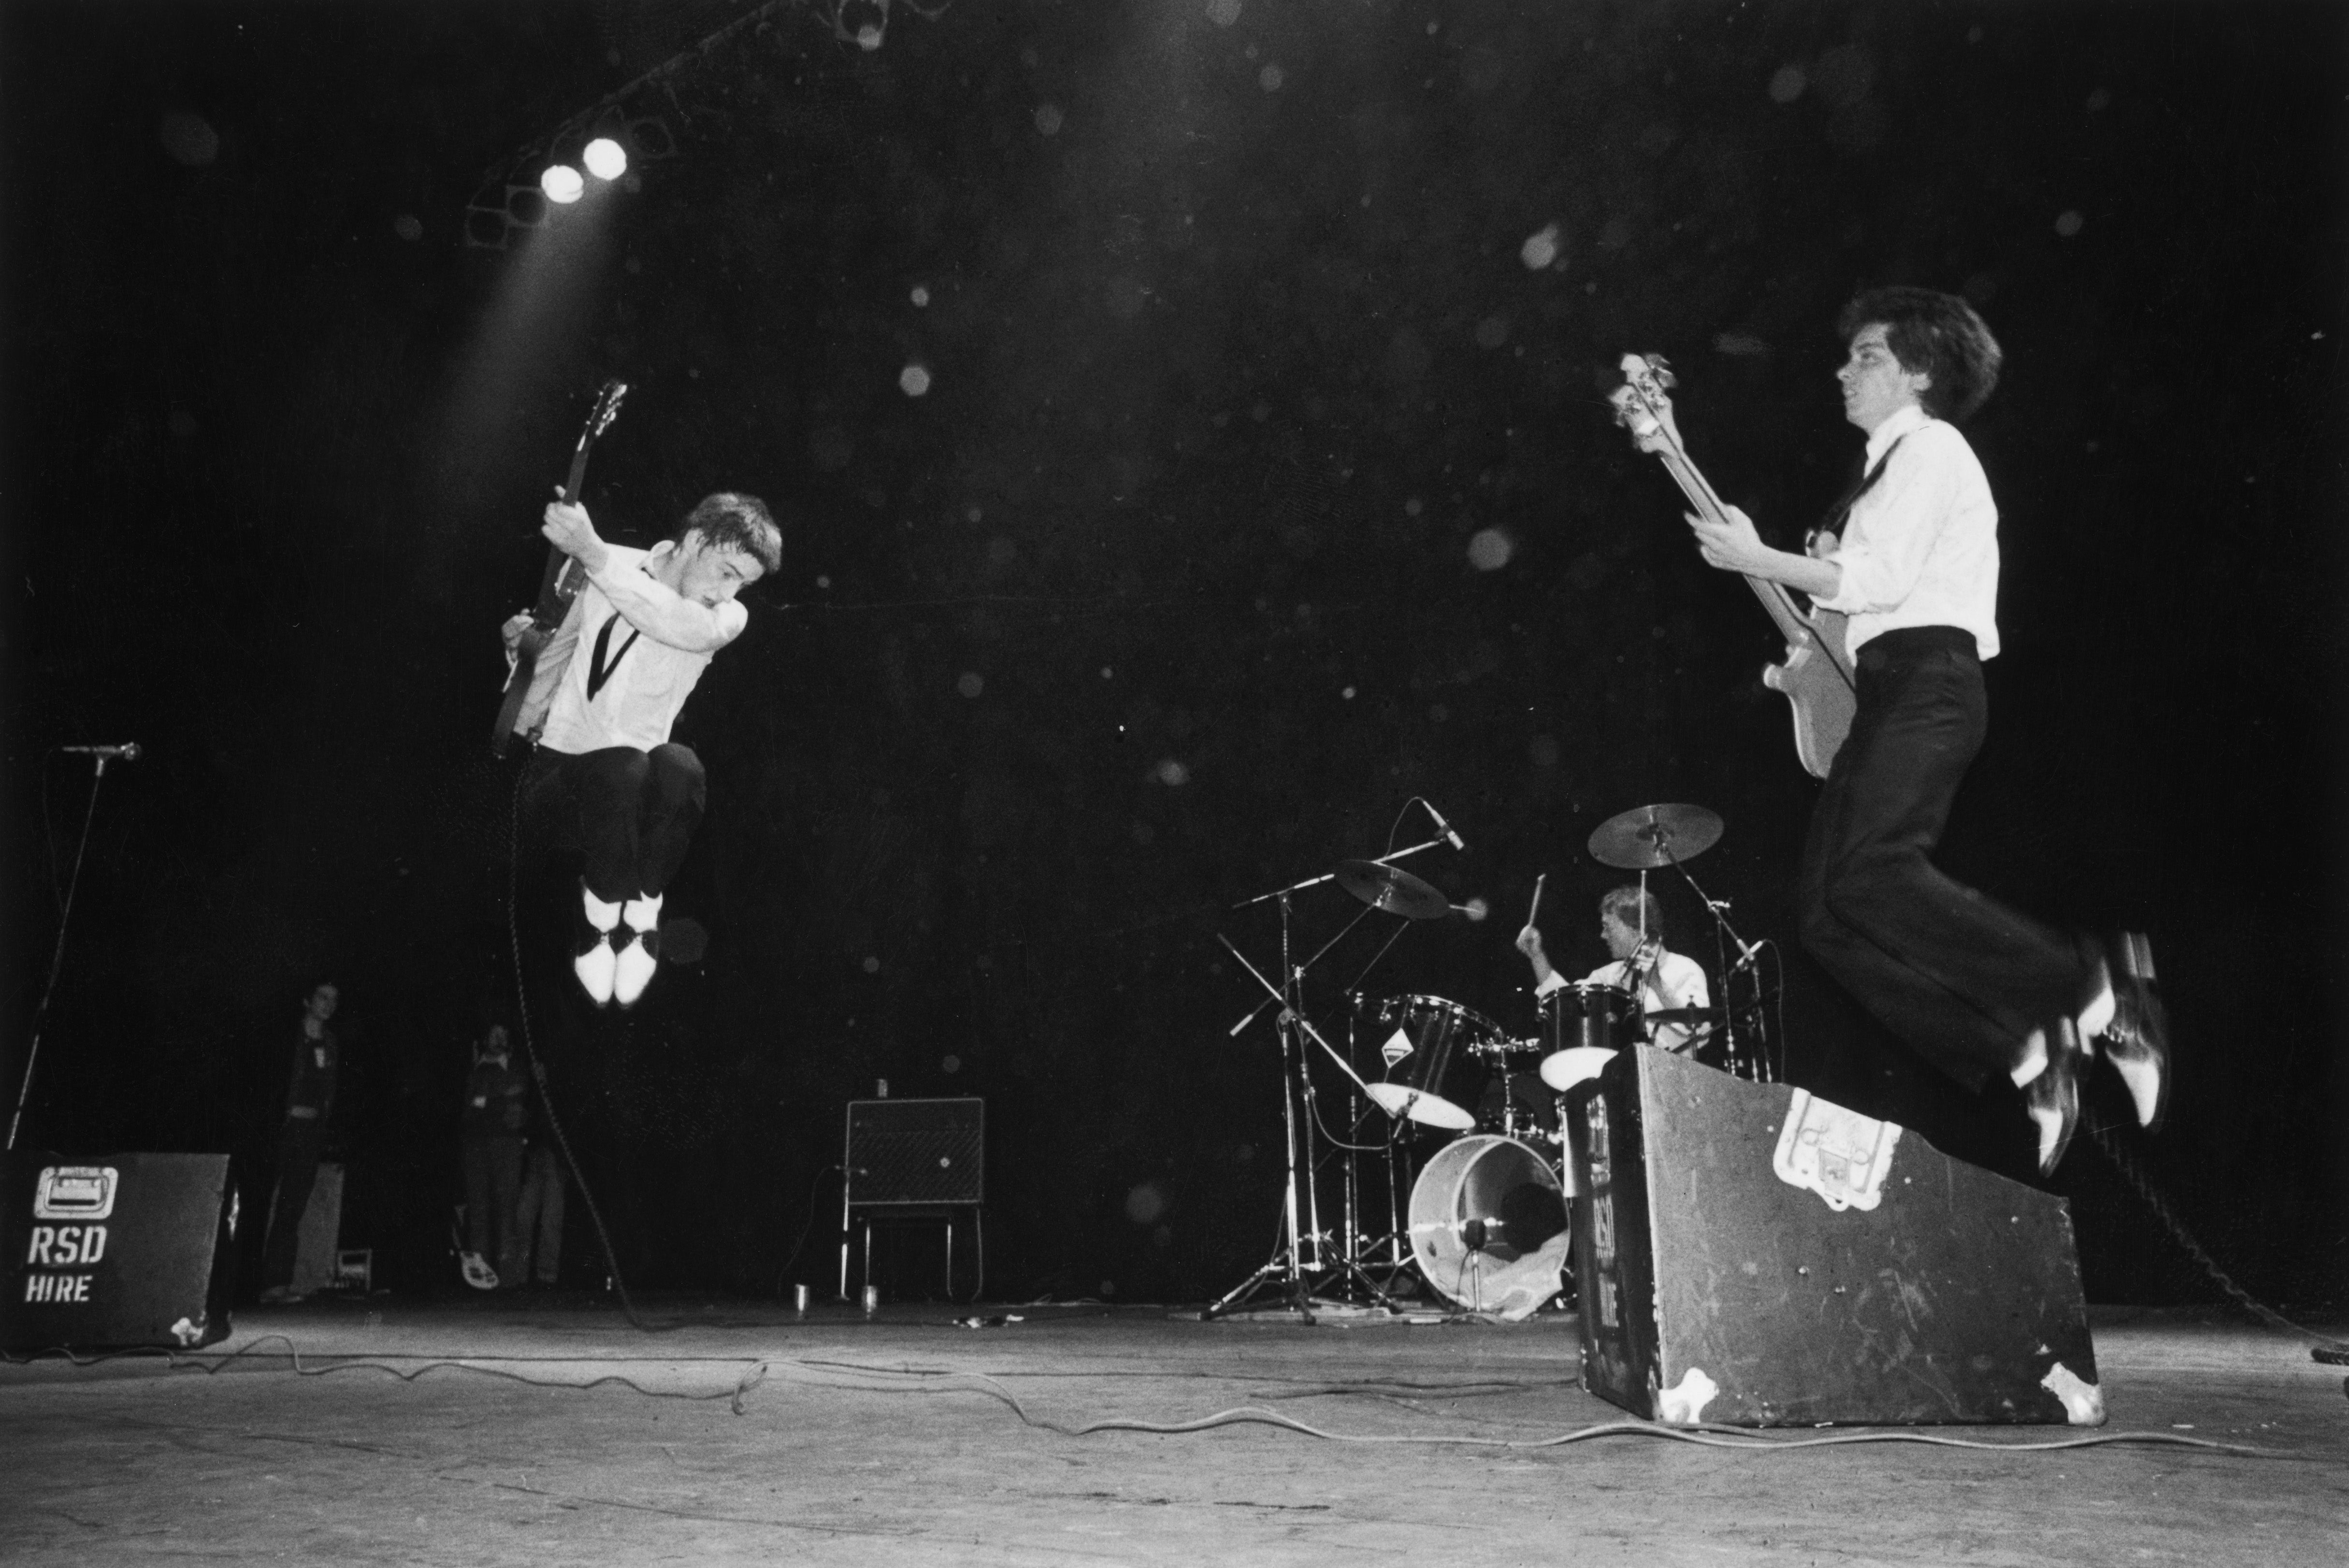 Paul Weller, Rick Buckler and Bruce Foxton on stage at the Rainbow Theatre, London, in 1977